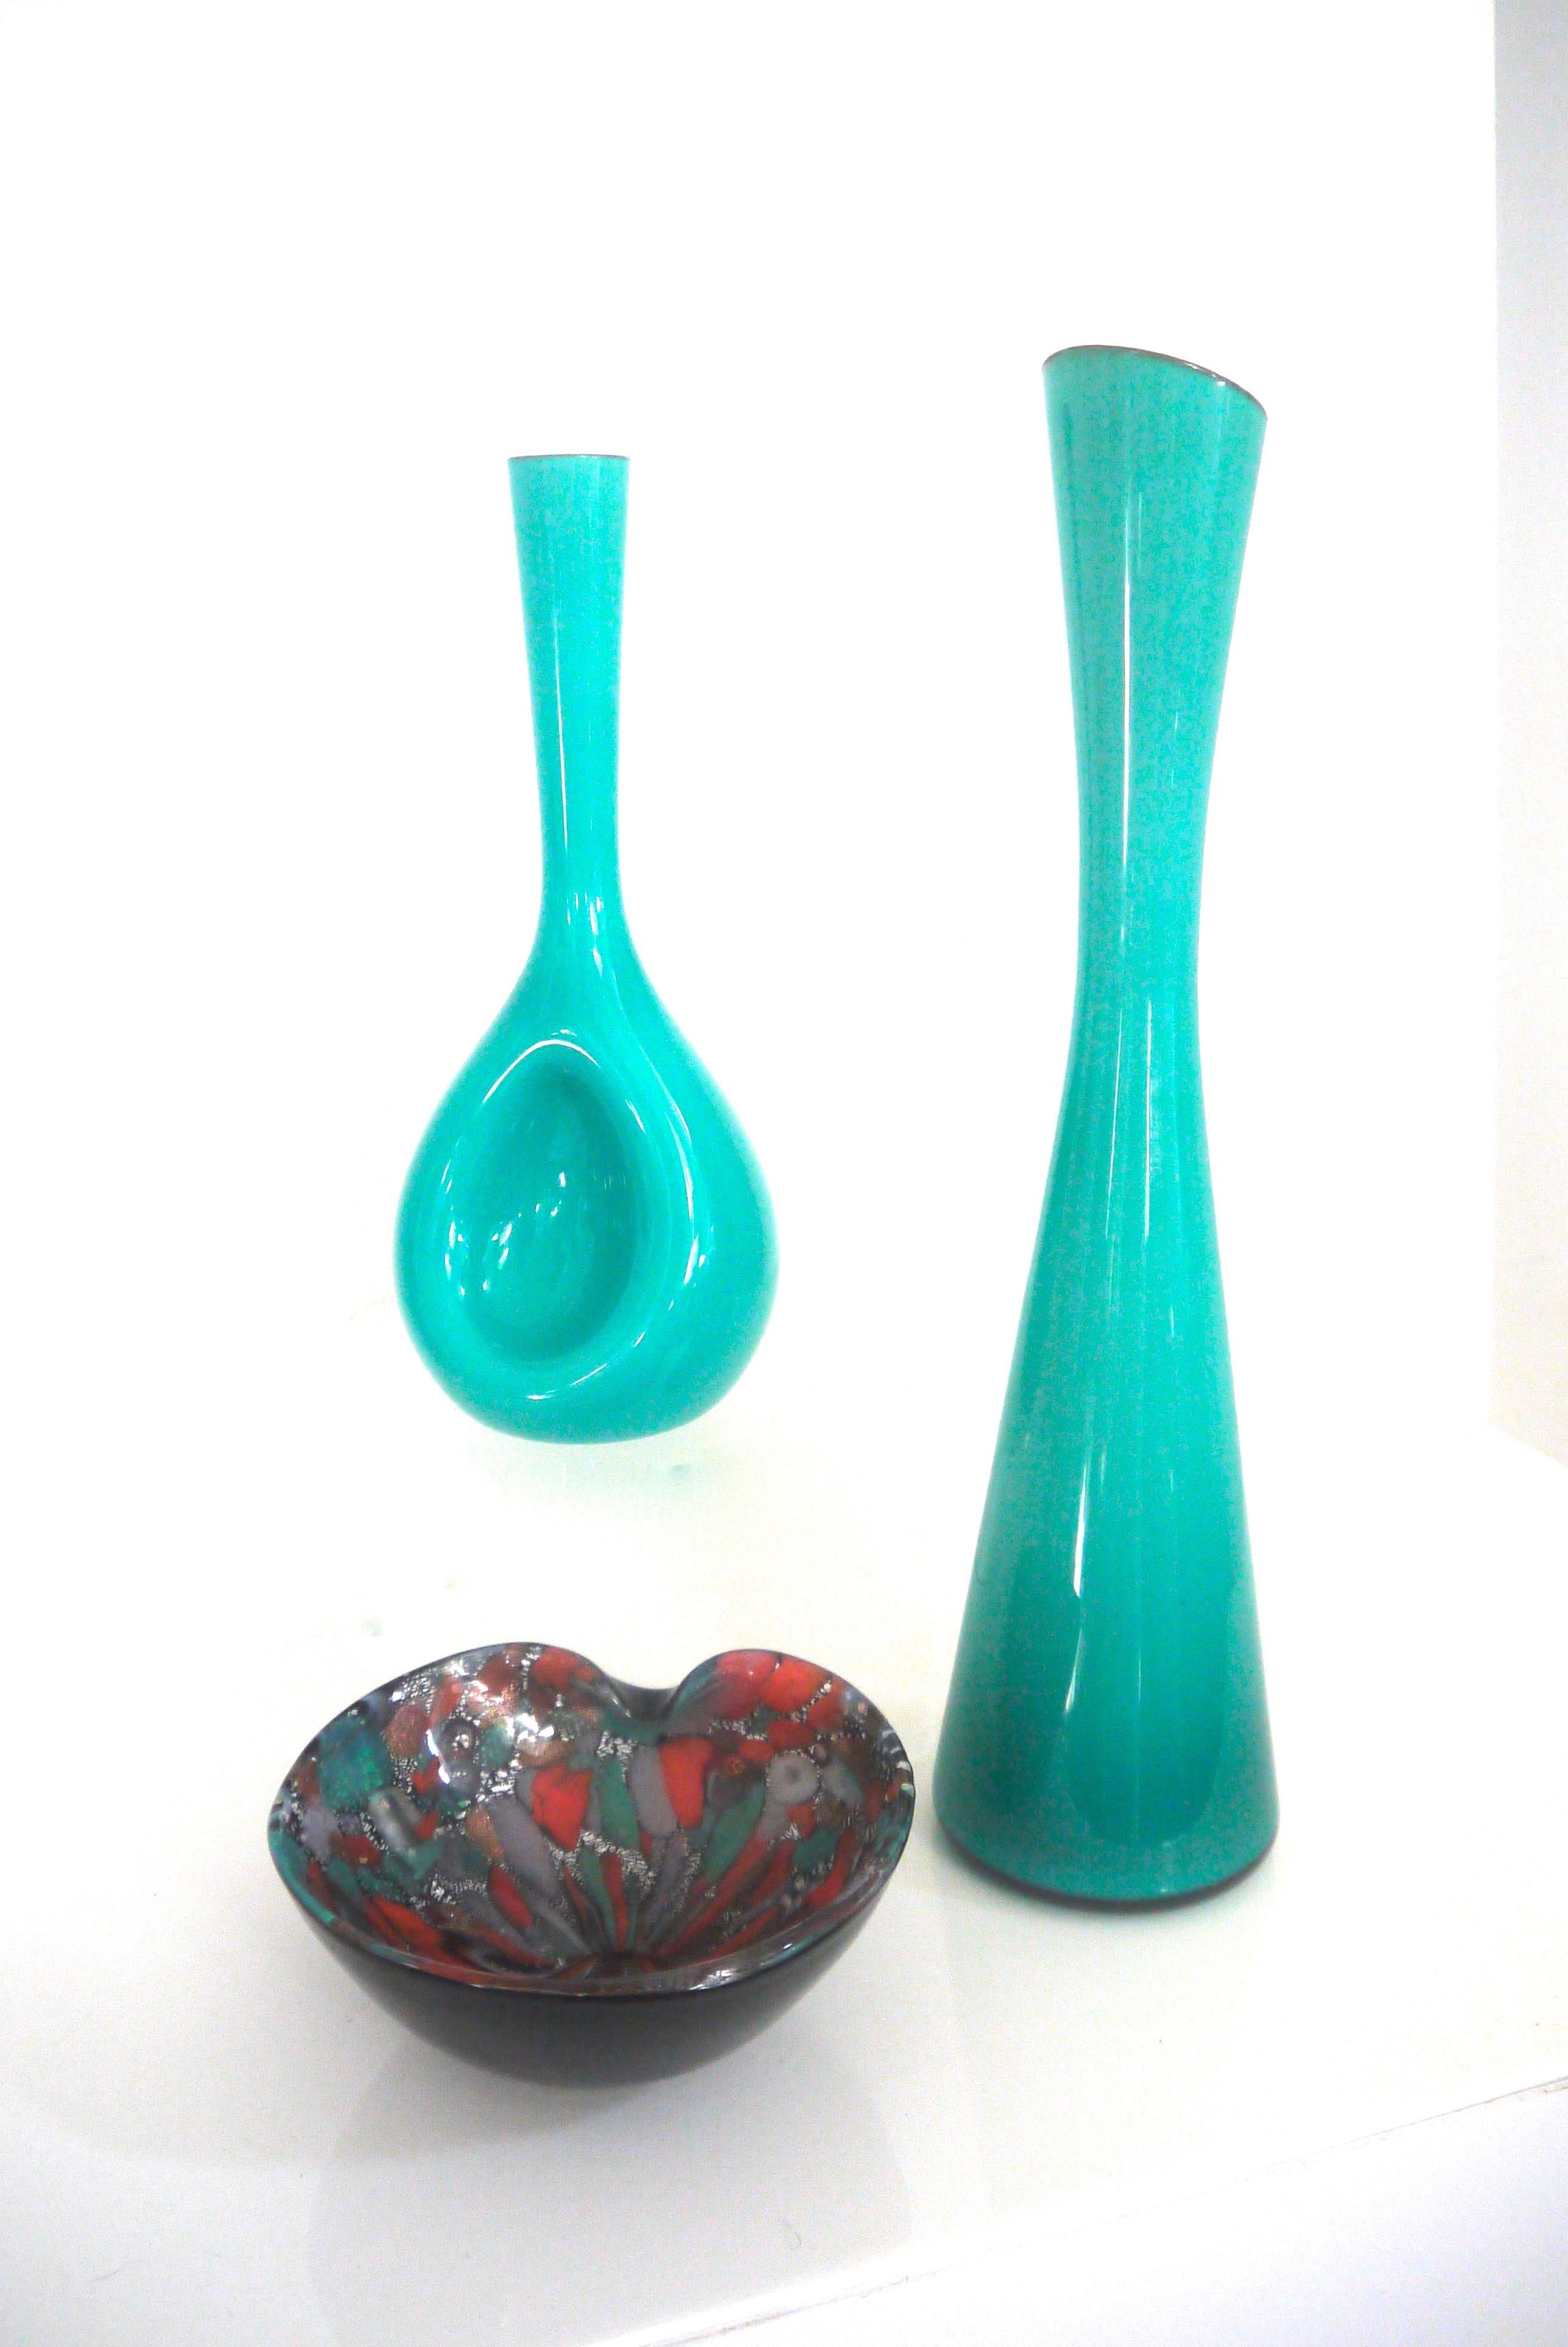 This pair of cased glass vases was designed by Gunnar Ander for Lindshammar in the early 1960s.

The smaller vase measures: Height 25 x diameter 10 cm.
The large vase geight 35 cm diameter 8 cm.

 